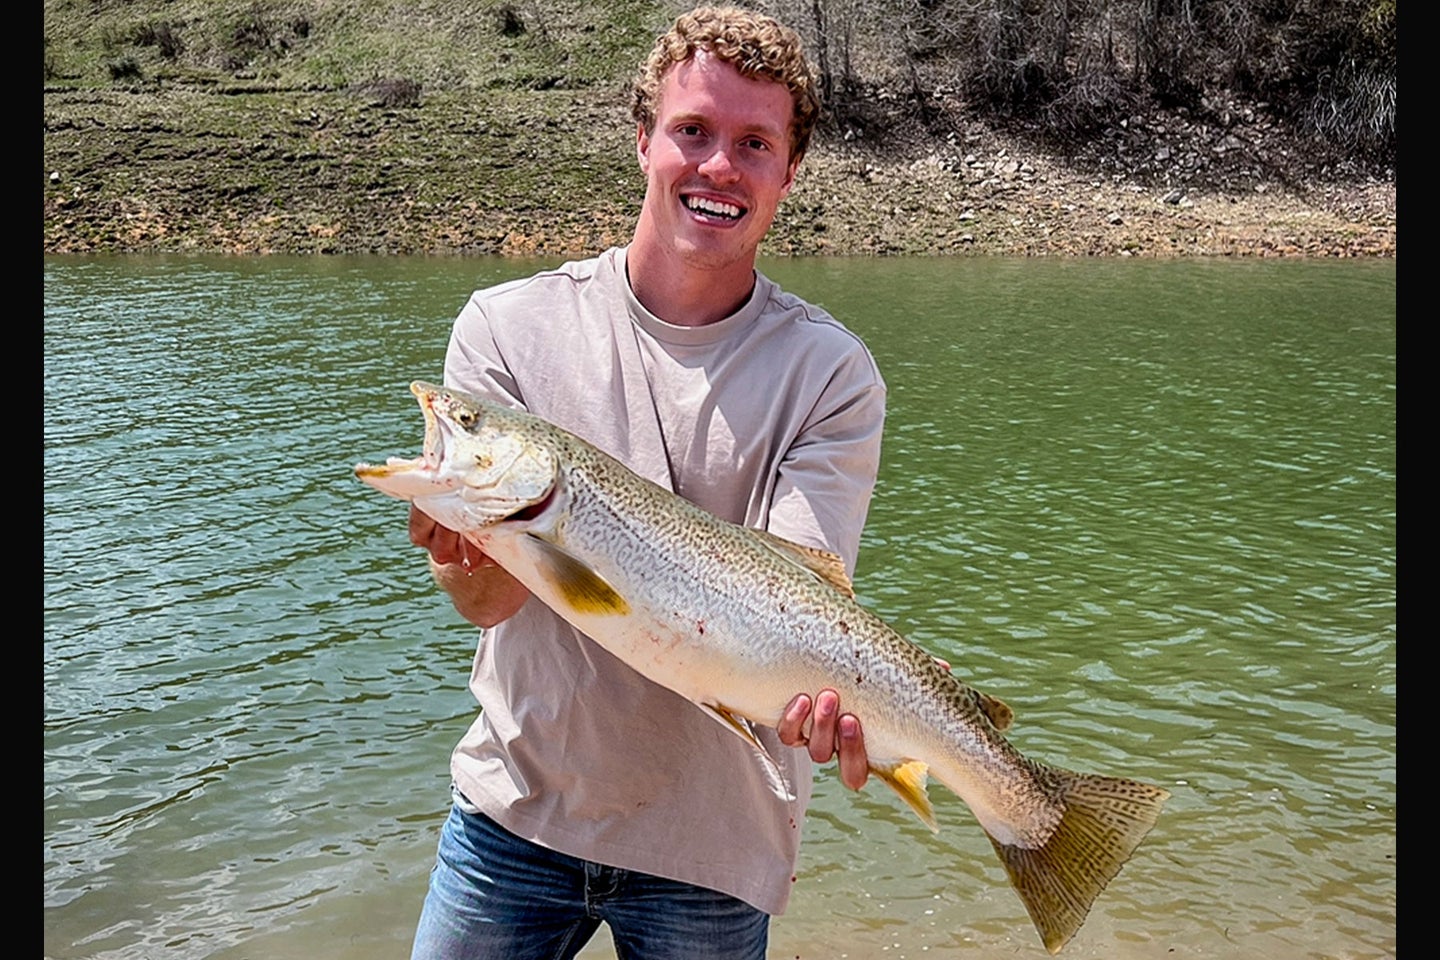 An Idaho angler poses with an illegally-caught trout.